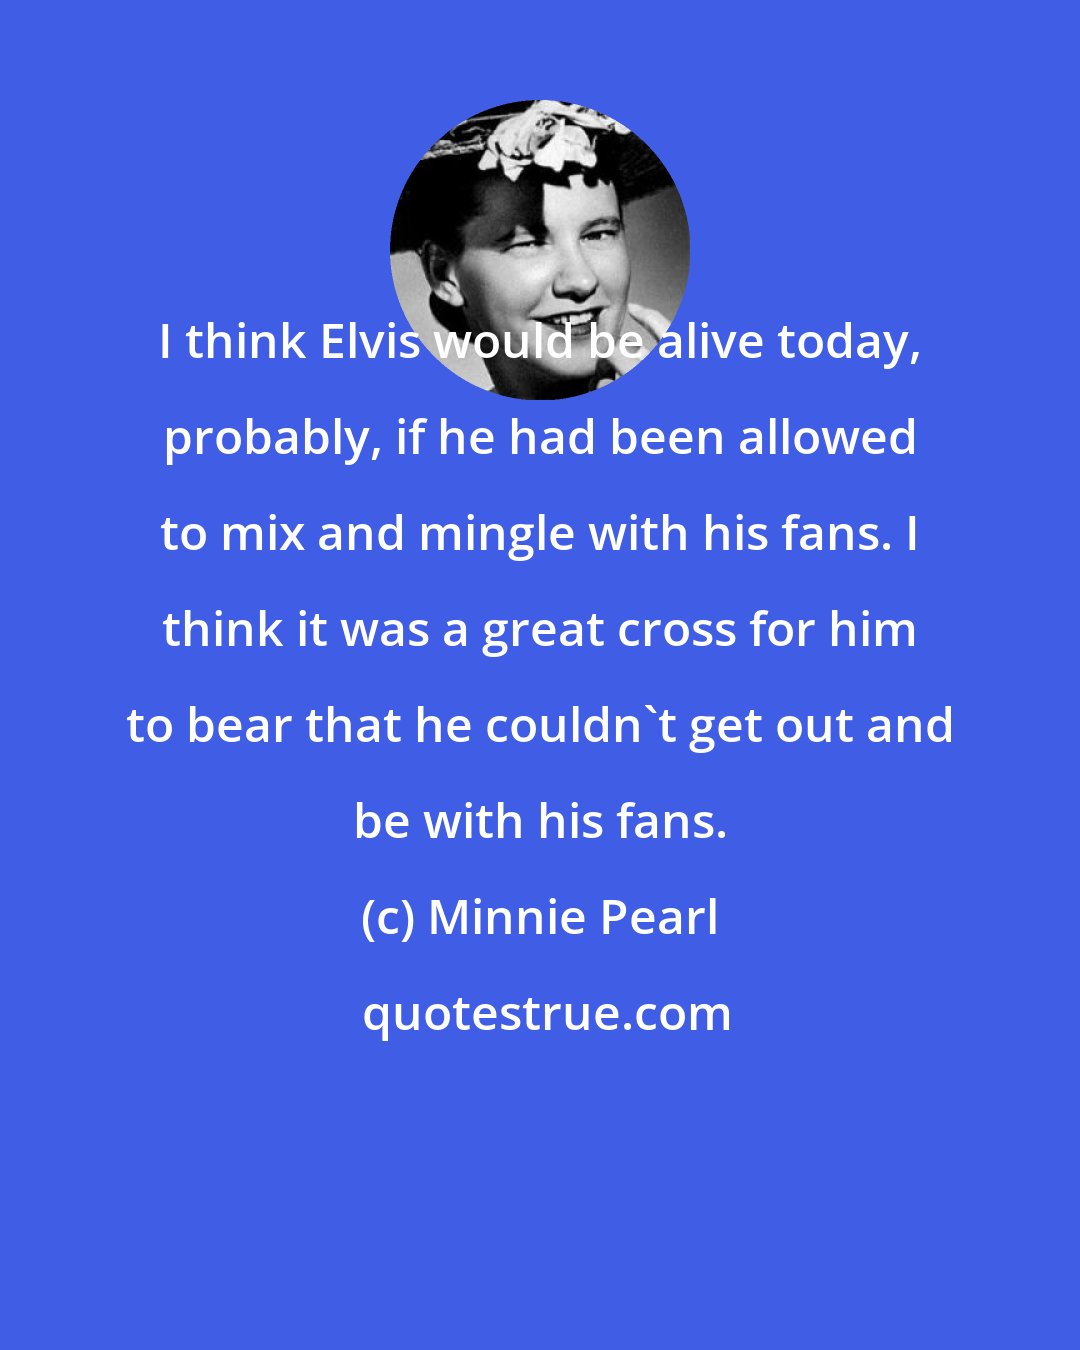 Minnie Pearl: I think Elvis would be alive today, probably, if he had been allowed to mix and mingle with his fans. I think it was a great cross for him to bear that he couldn't get out and be with his fans.